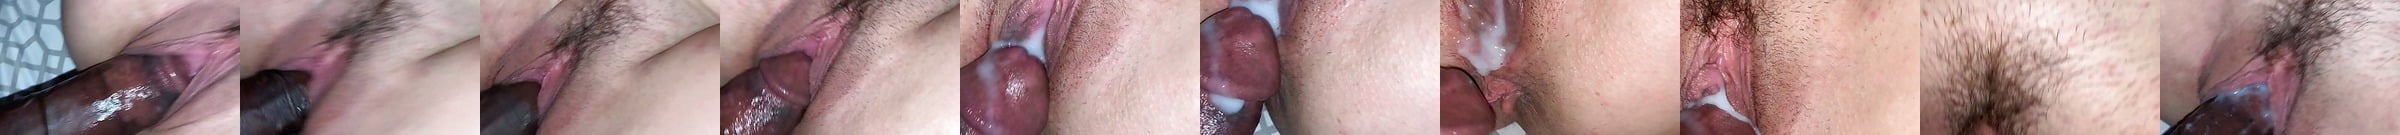 Huge Bbc Is Pulsating Cum In Pussy Free Porn 61 Xhamster